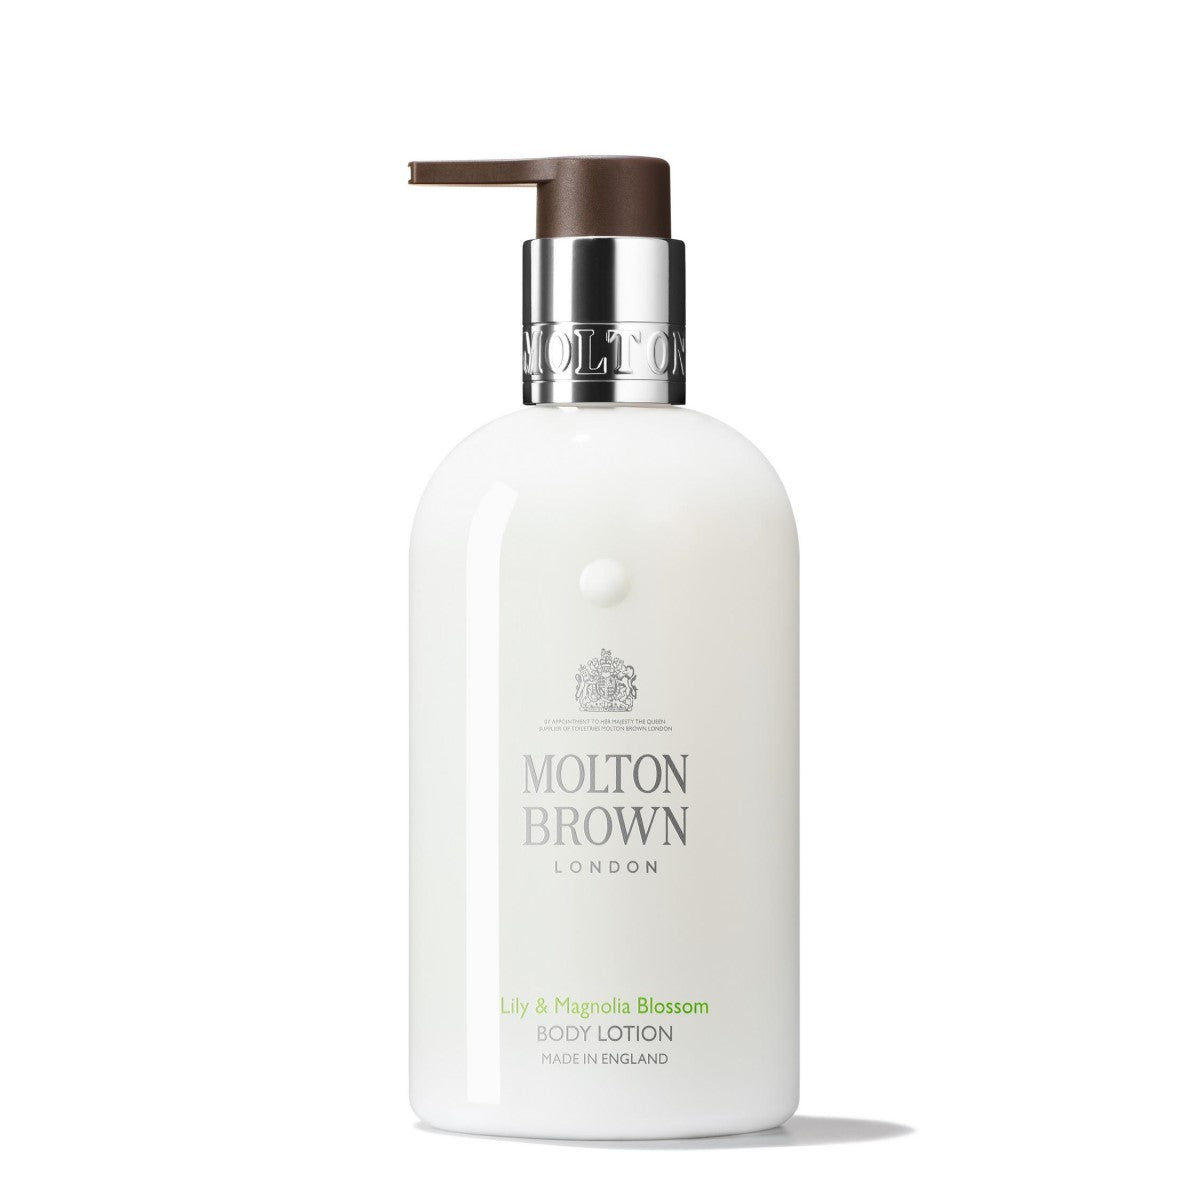 Primary Image of Body Lotion